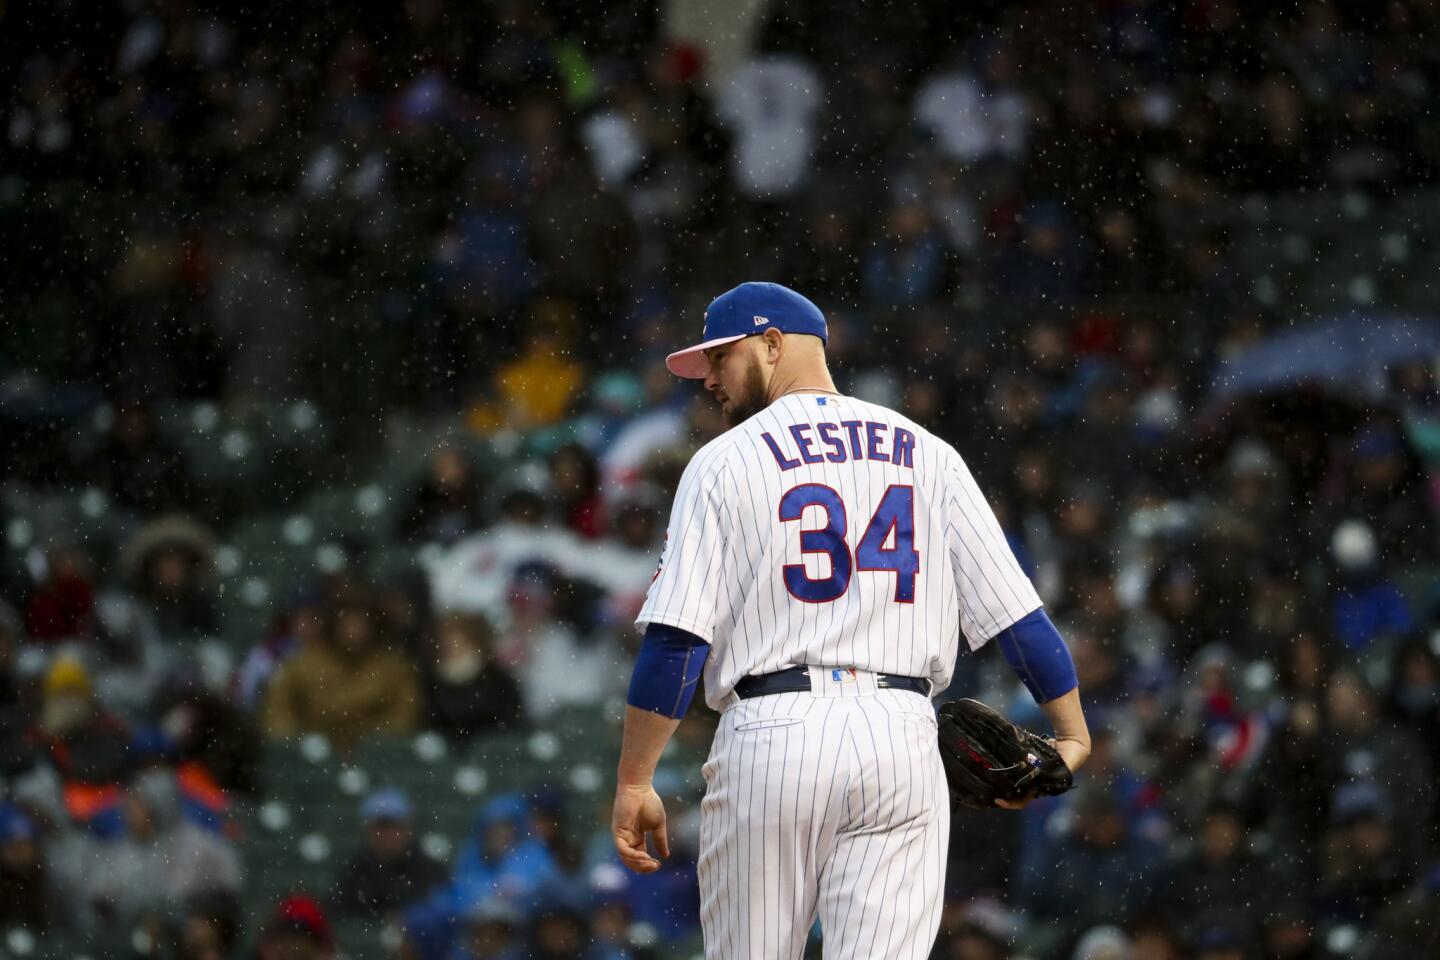 Cubs starting pitcher Jon Lester prepares to deliver to the plate during the fourth inning against the Brewers on May 12, 2019, at Wrigley Field.